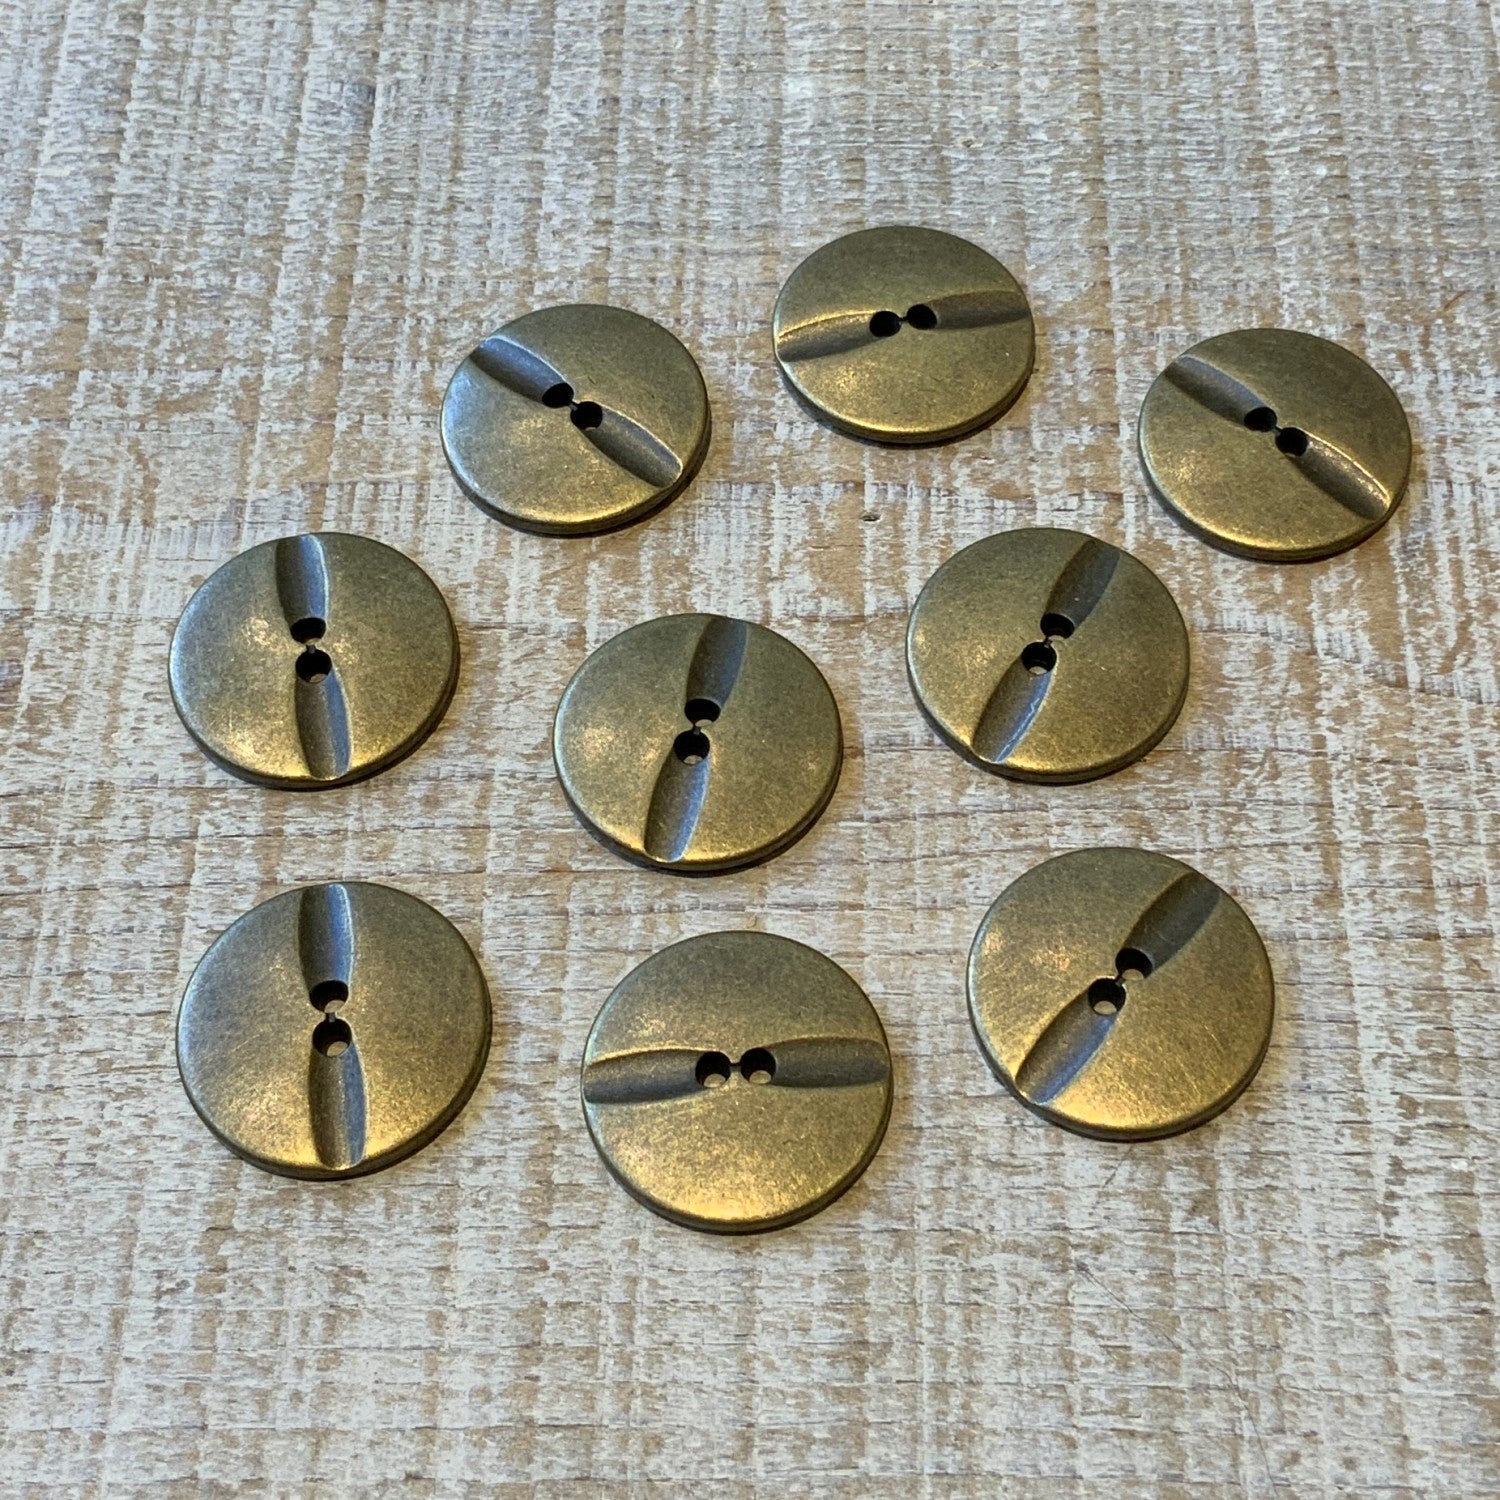 Textile Garden-Old Brass/Bronze Metal Buttons with Groove